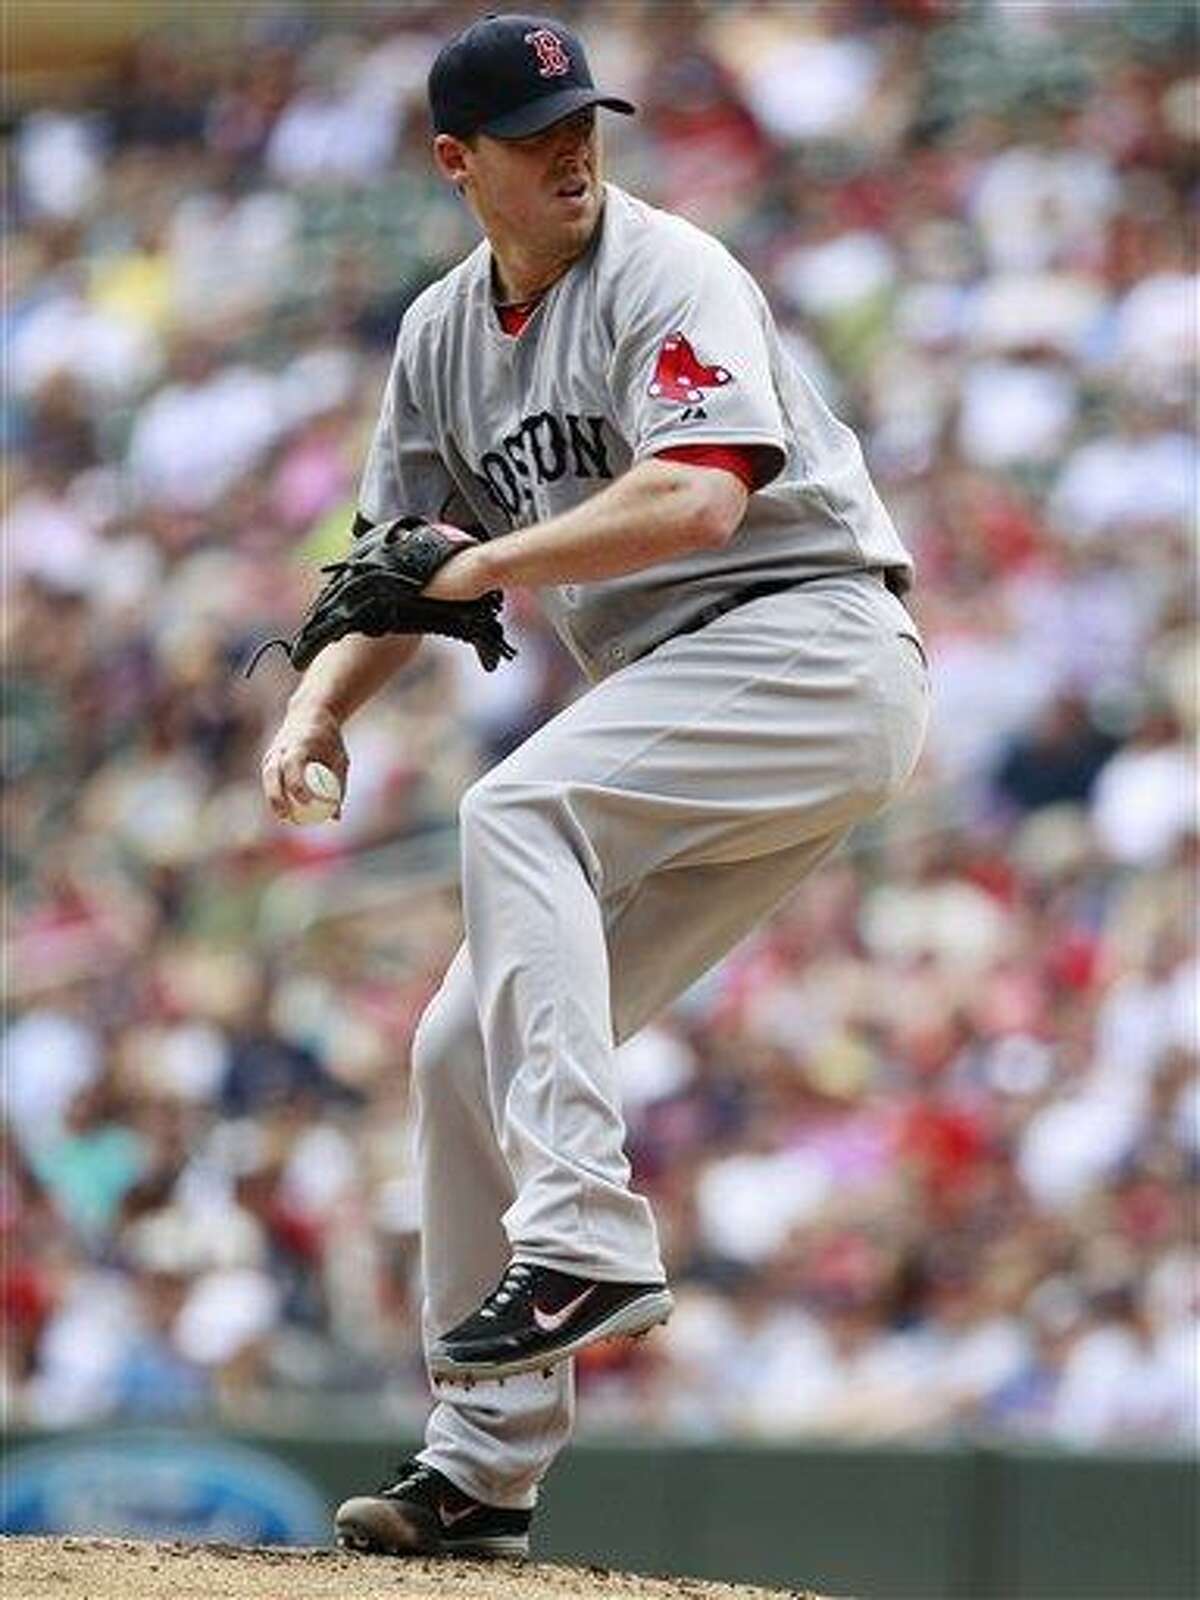 Boston Red Sox starting pitcher John Lackey (41) throws against the Minnesota Twins during the inning inning of a baseball game, Sunday, May 19, 2013, in Minneapolis. (AP Photo/Genevieve Ross)